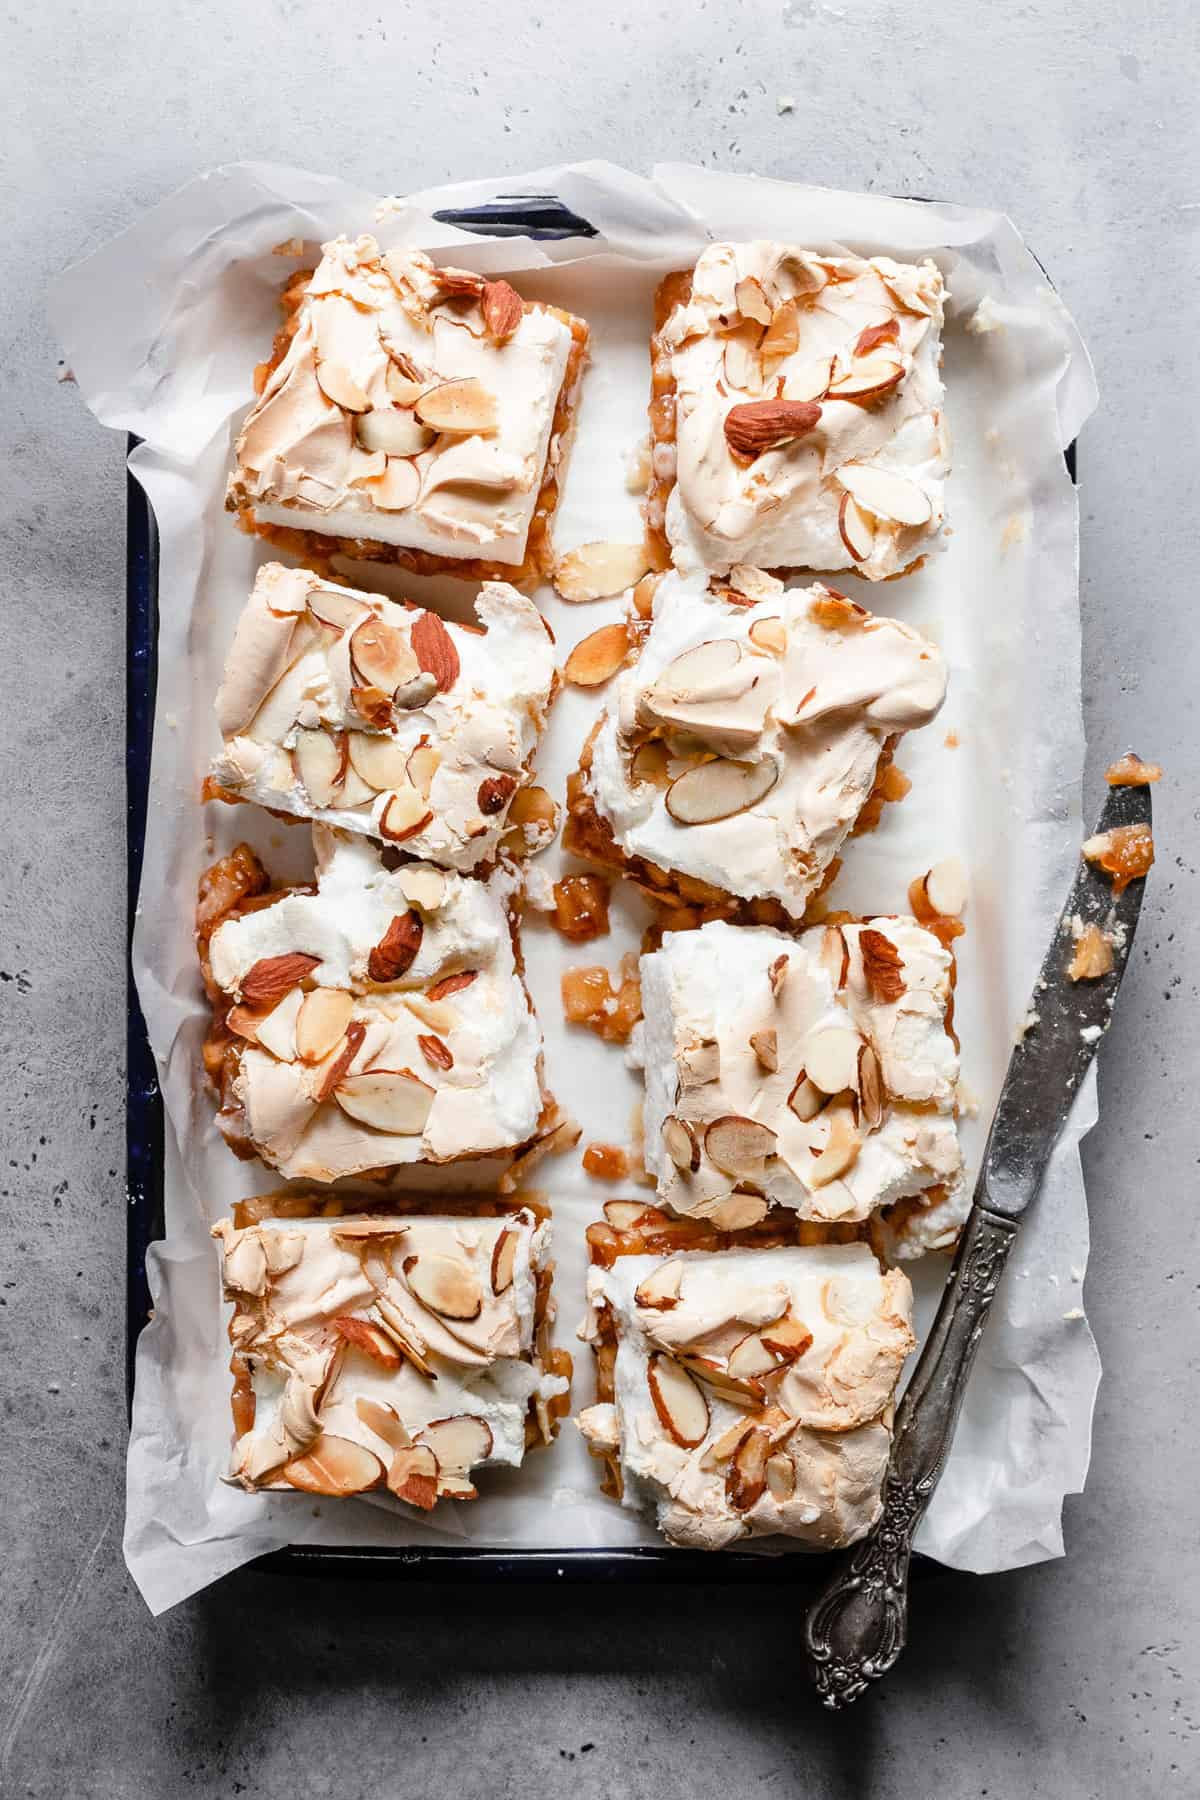 Apple bars topped with meringue.